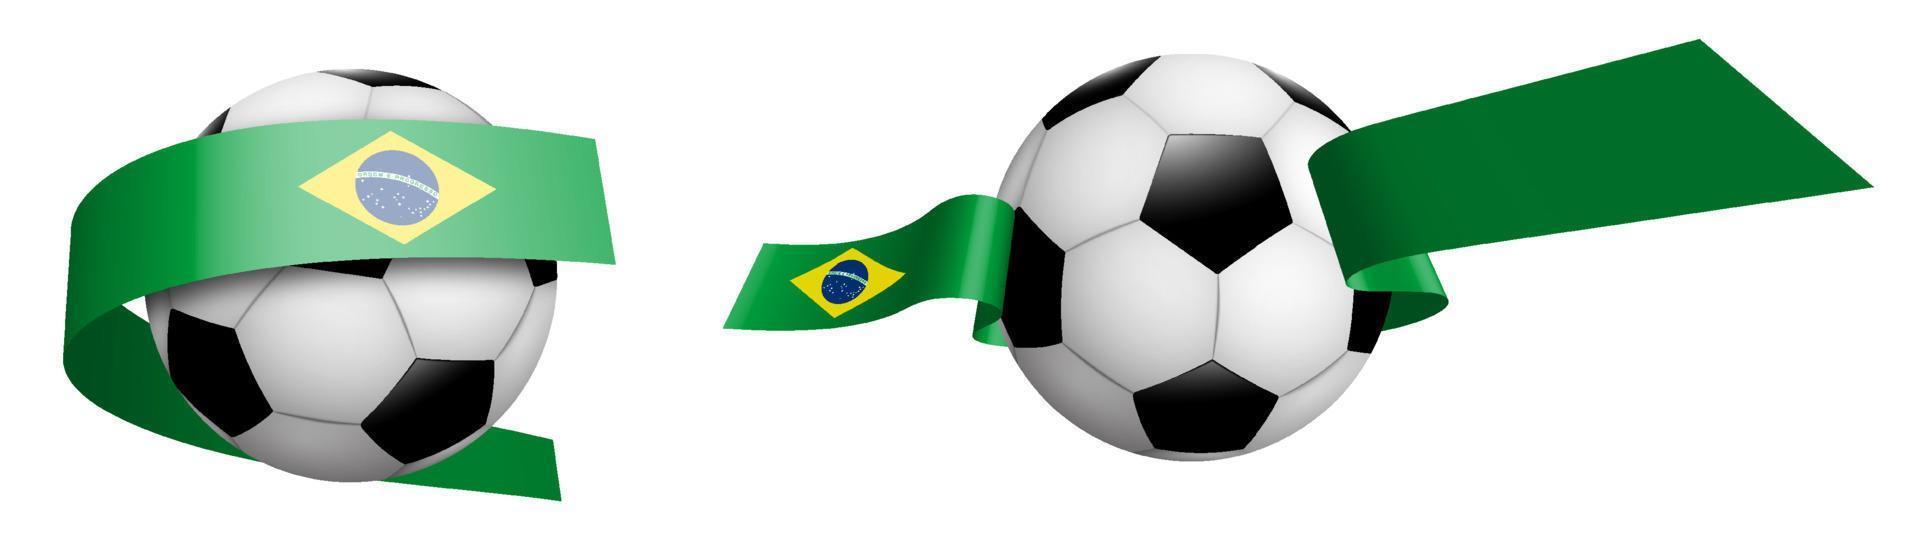 balls for soccer, classic football in ribbons with colors Flag of Republic of Brazil. Design element for football competitions. Isolated vector on white background